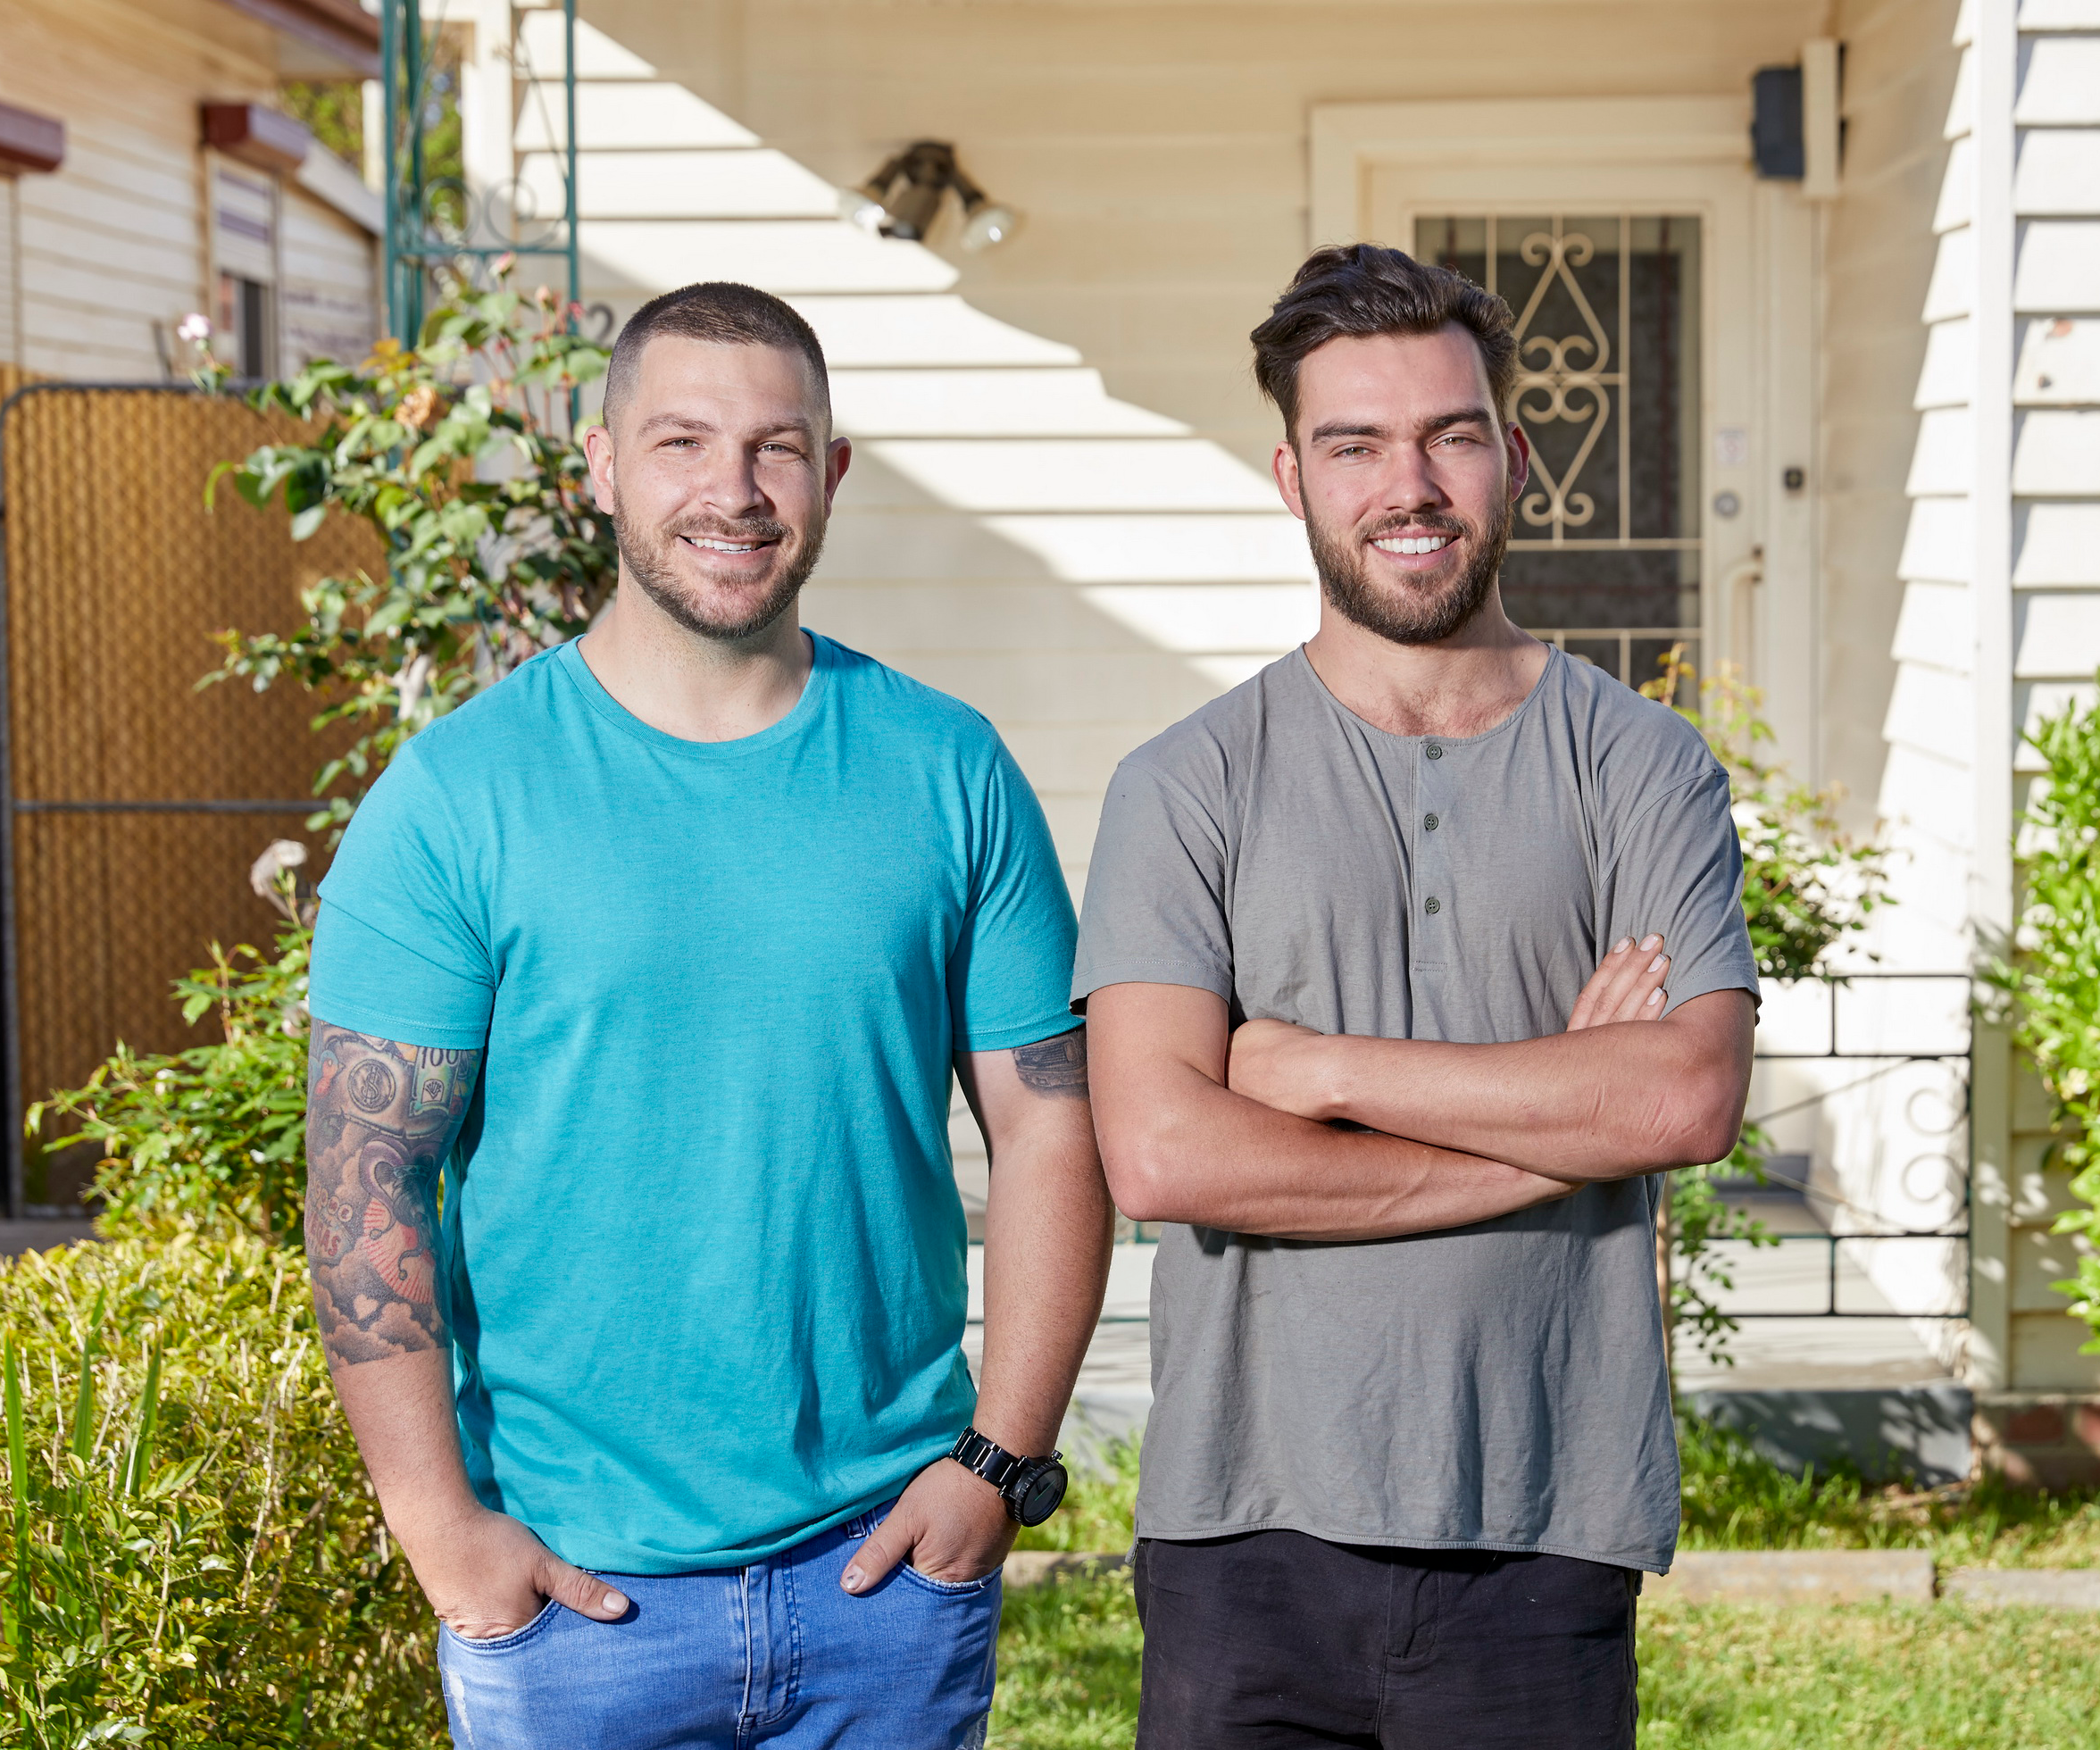 House Rules’ Tim and Mat struggled with the loss of their grandfather